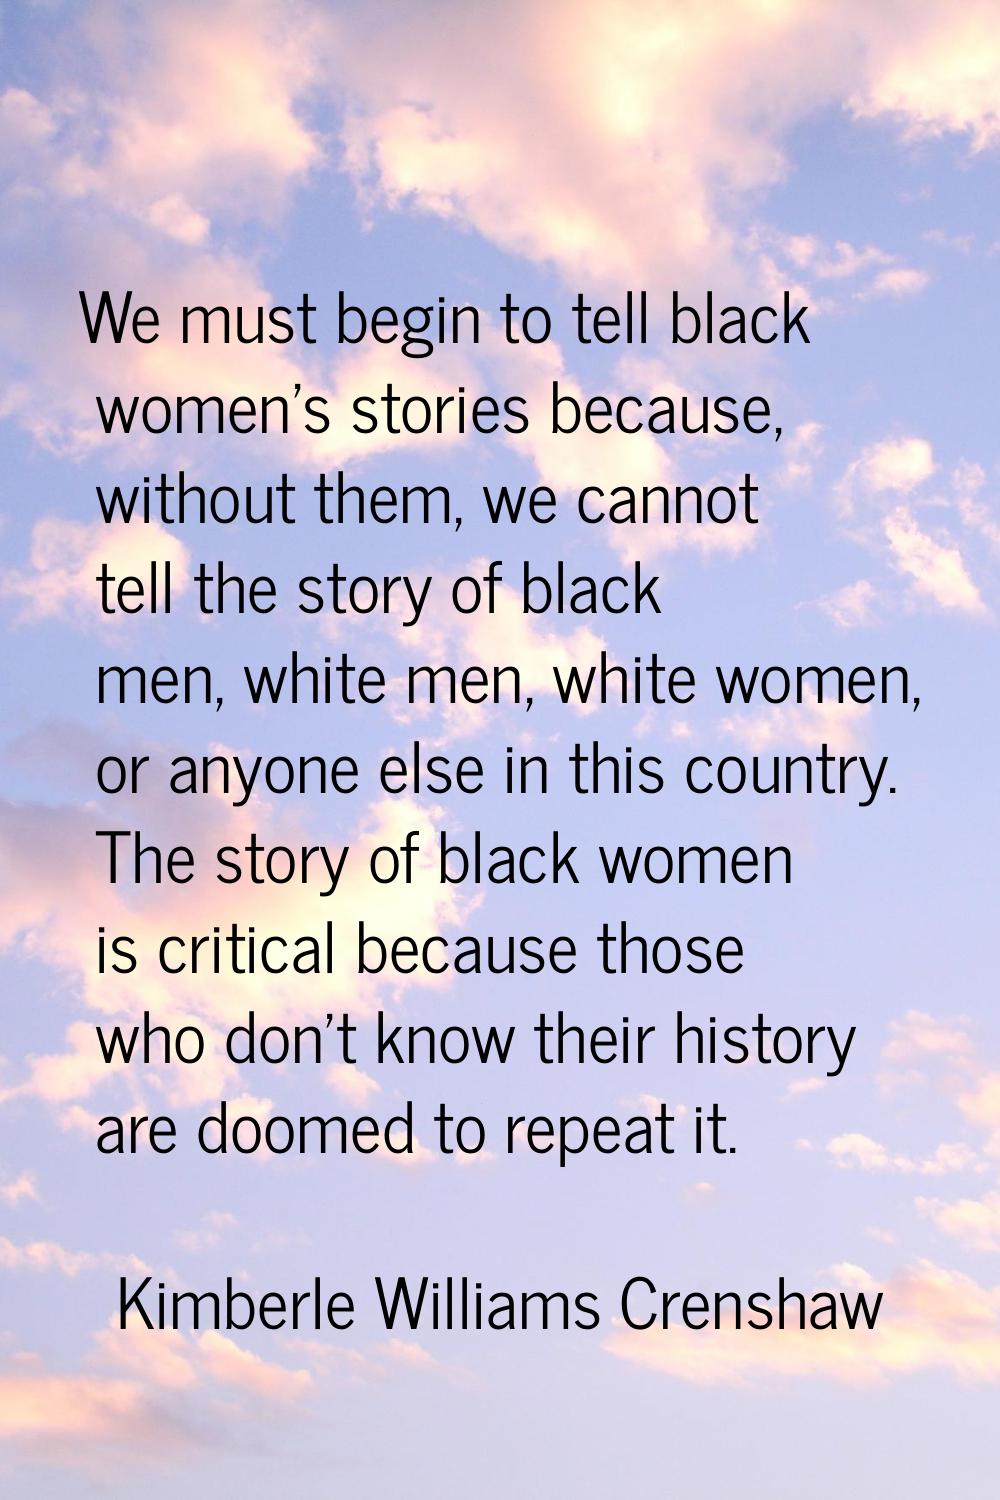 We must begin to tell black women's stories because, without them, we cannot tell the story of blac